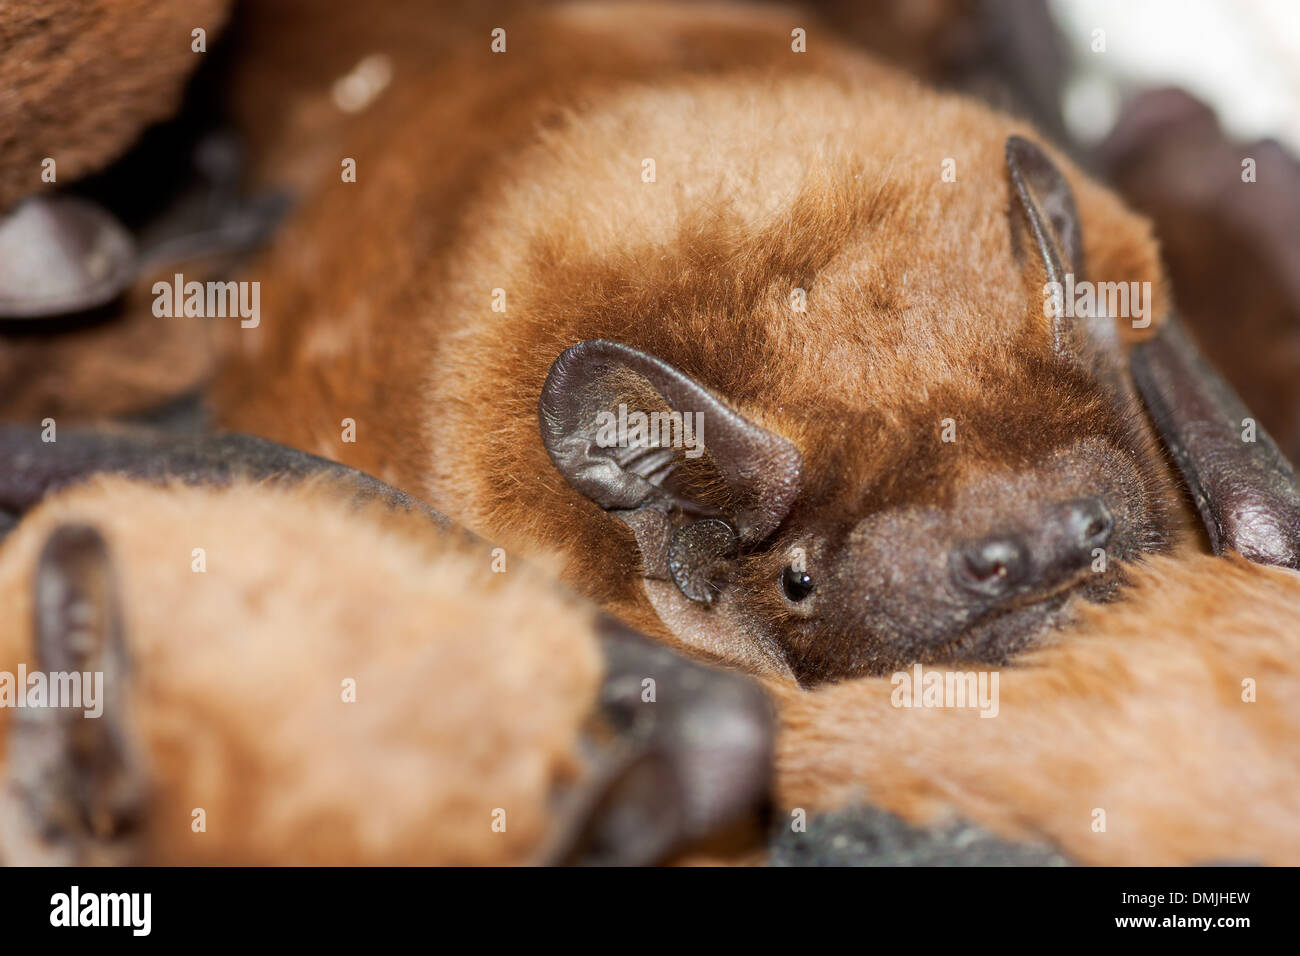 Close up of a bat (Pipistrellus is a genus of bats in the family Vespertilionidae) sleeping on the ground Stock Photo